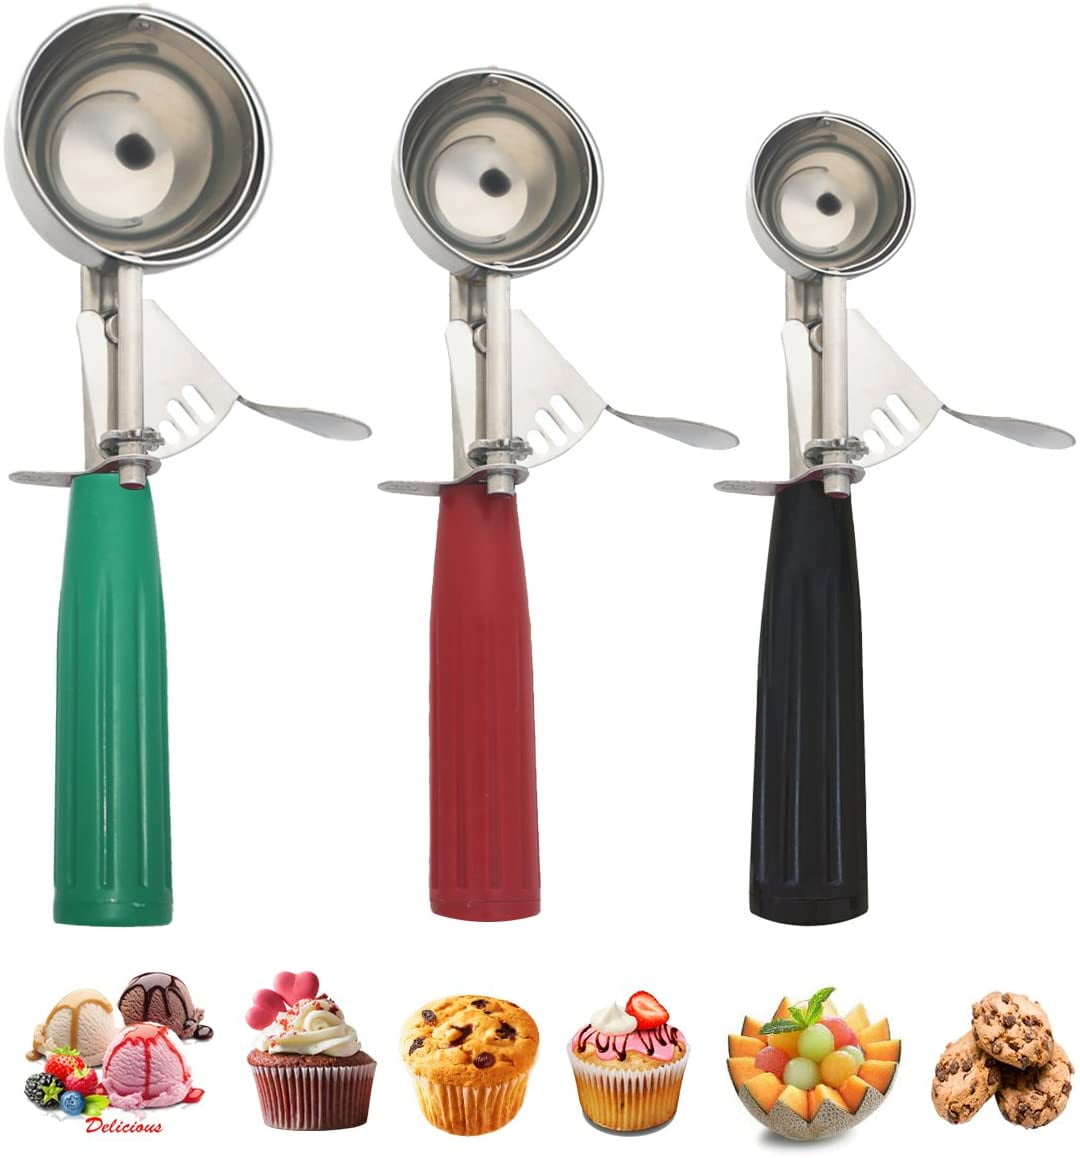 1.58 2.48 Inch 1.97 3 Pieces Ice Cream Scoop Set Cookie Cupcake Spoon with Trigger Stainless Steel Melon Baller Small Medium Large Cookie Scoop 